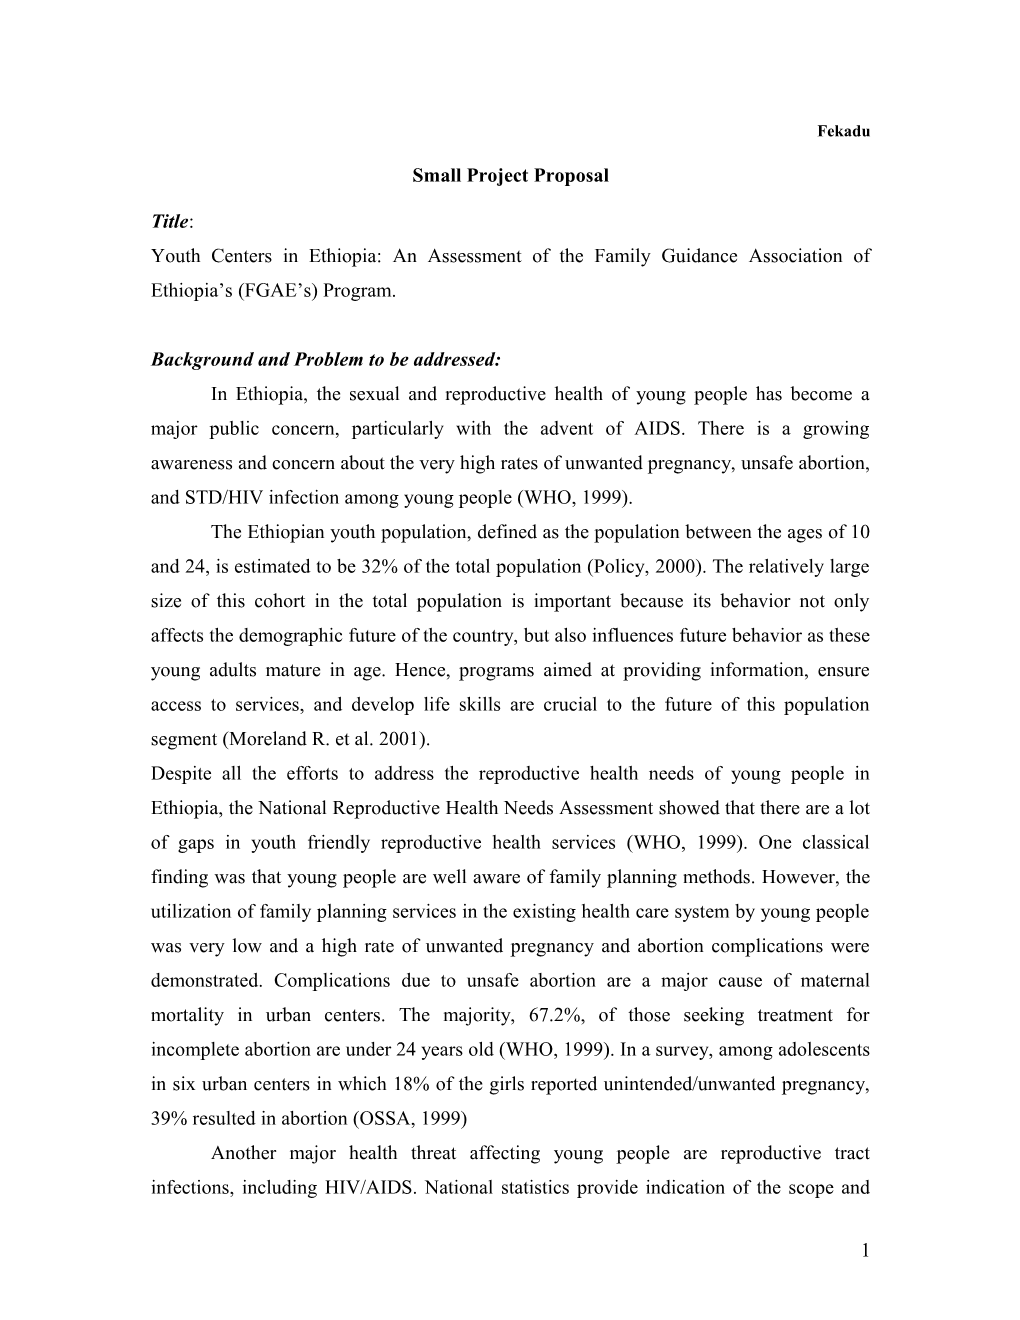 Small Project Concept Paper